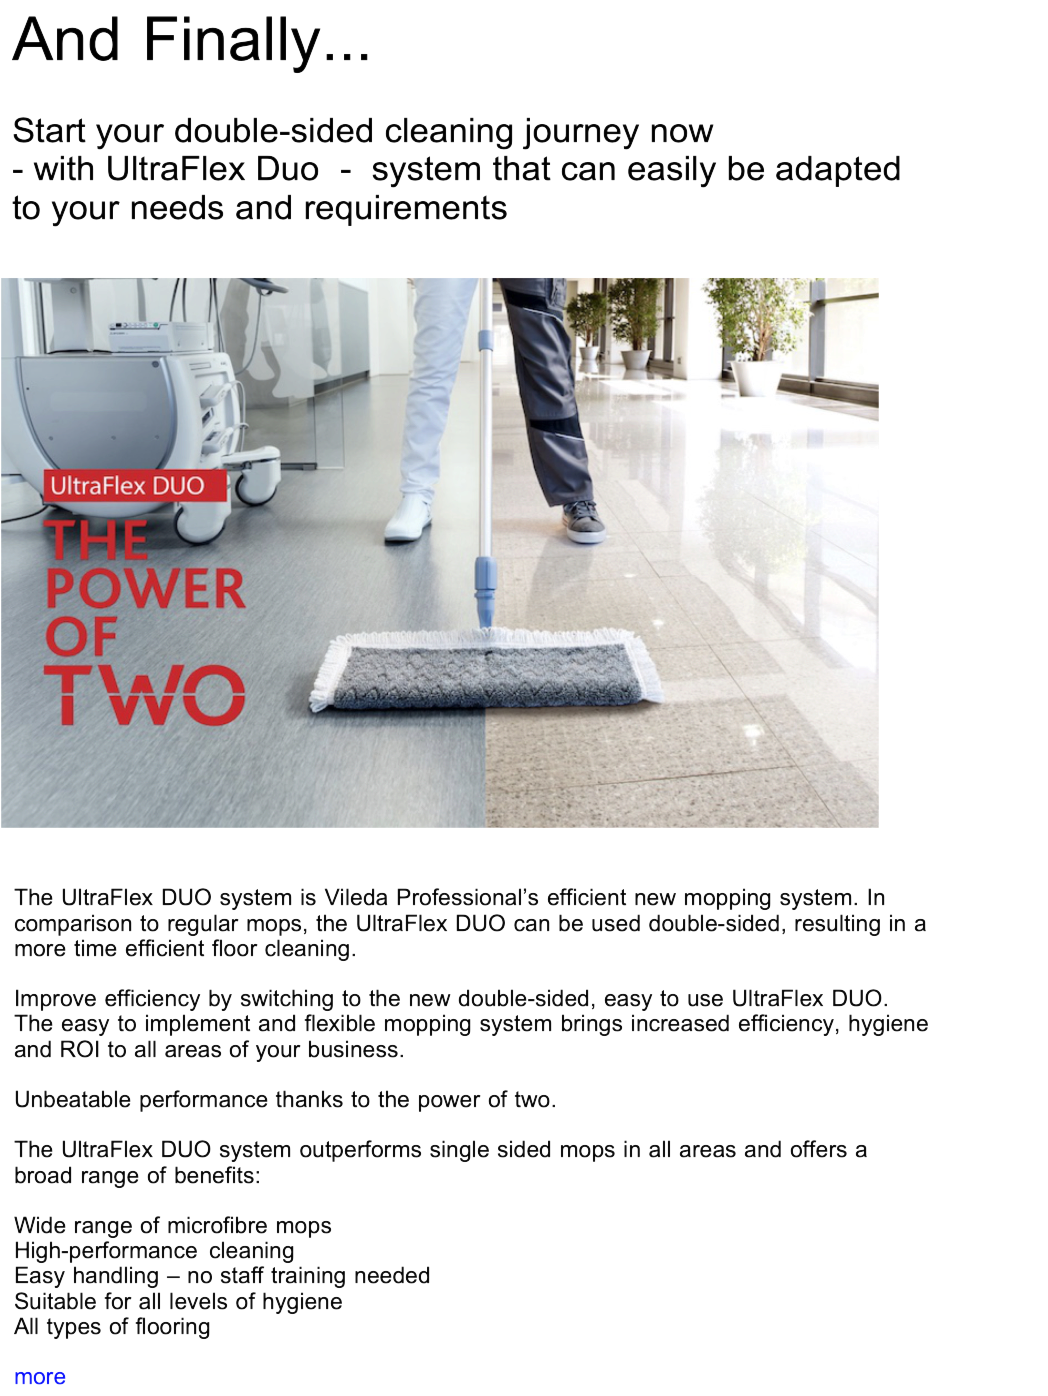 Advert: https://www.thecleanzine.com/pages/21073/start_your_double_sided_cleaning_journey_now_with_ultraflex_duo_system_that_can_easily_be_adapted_to_your_needs_and_requirements/